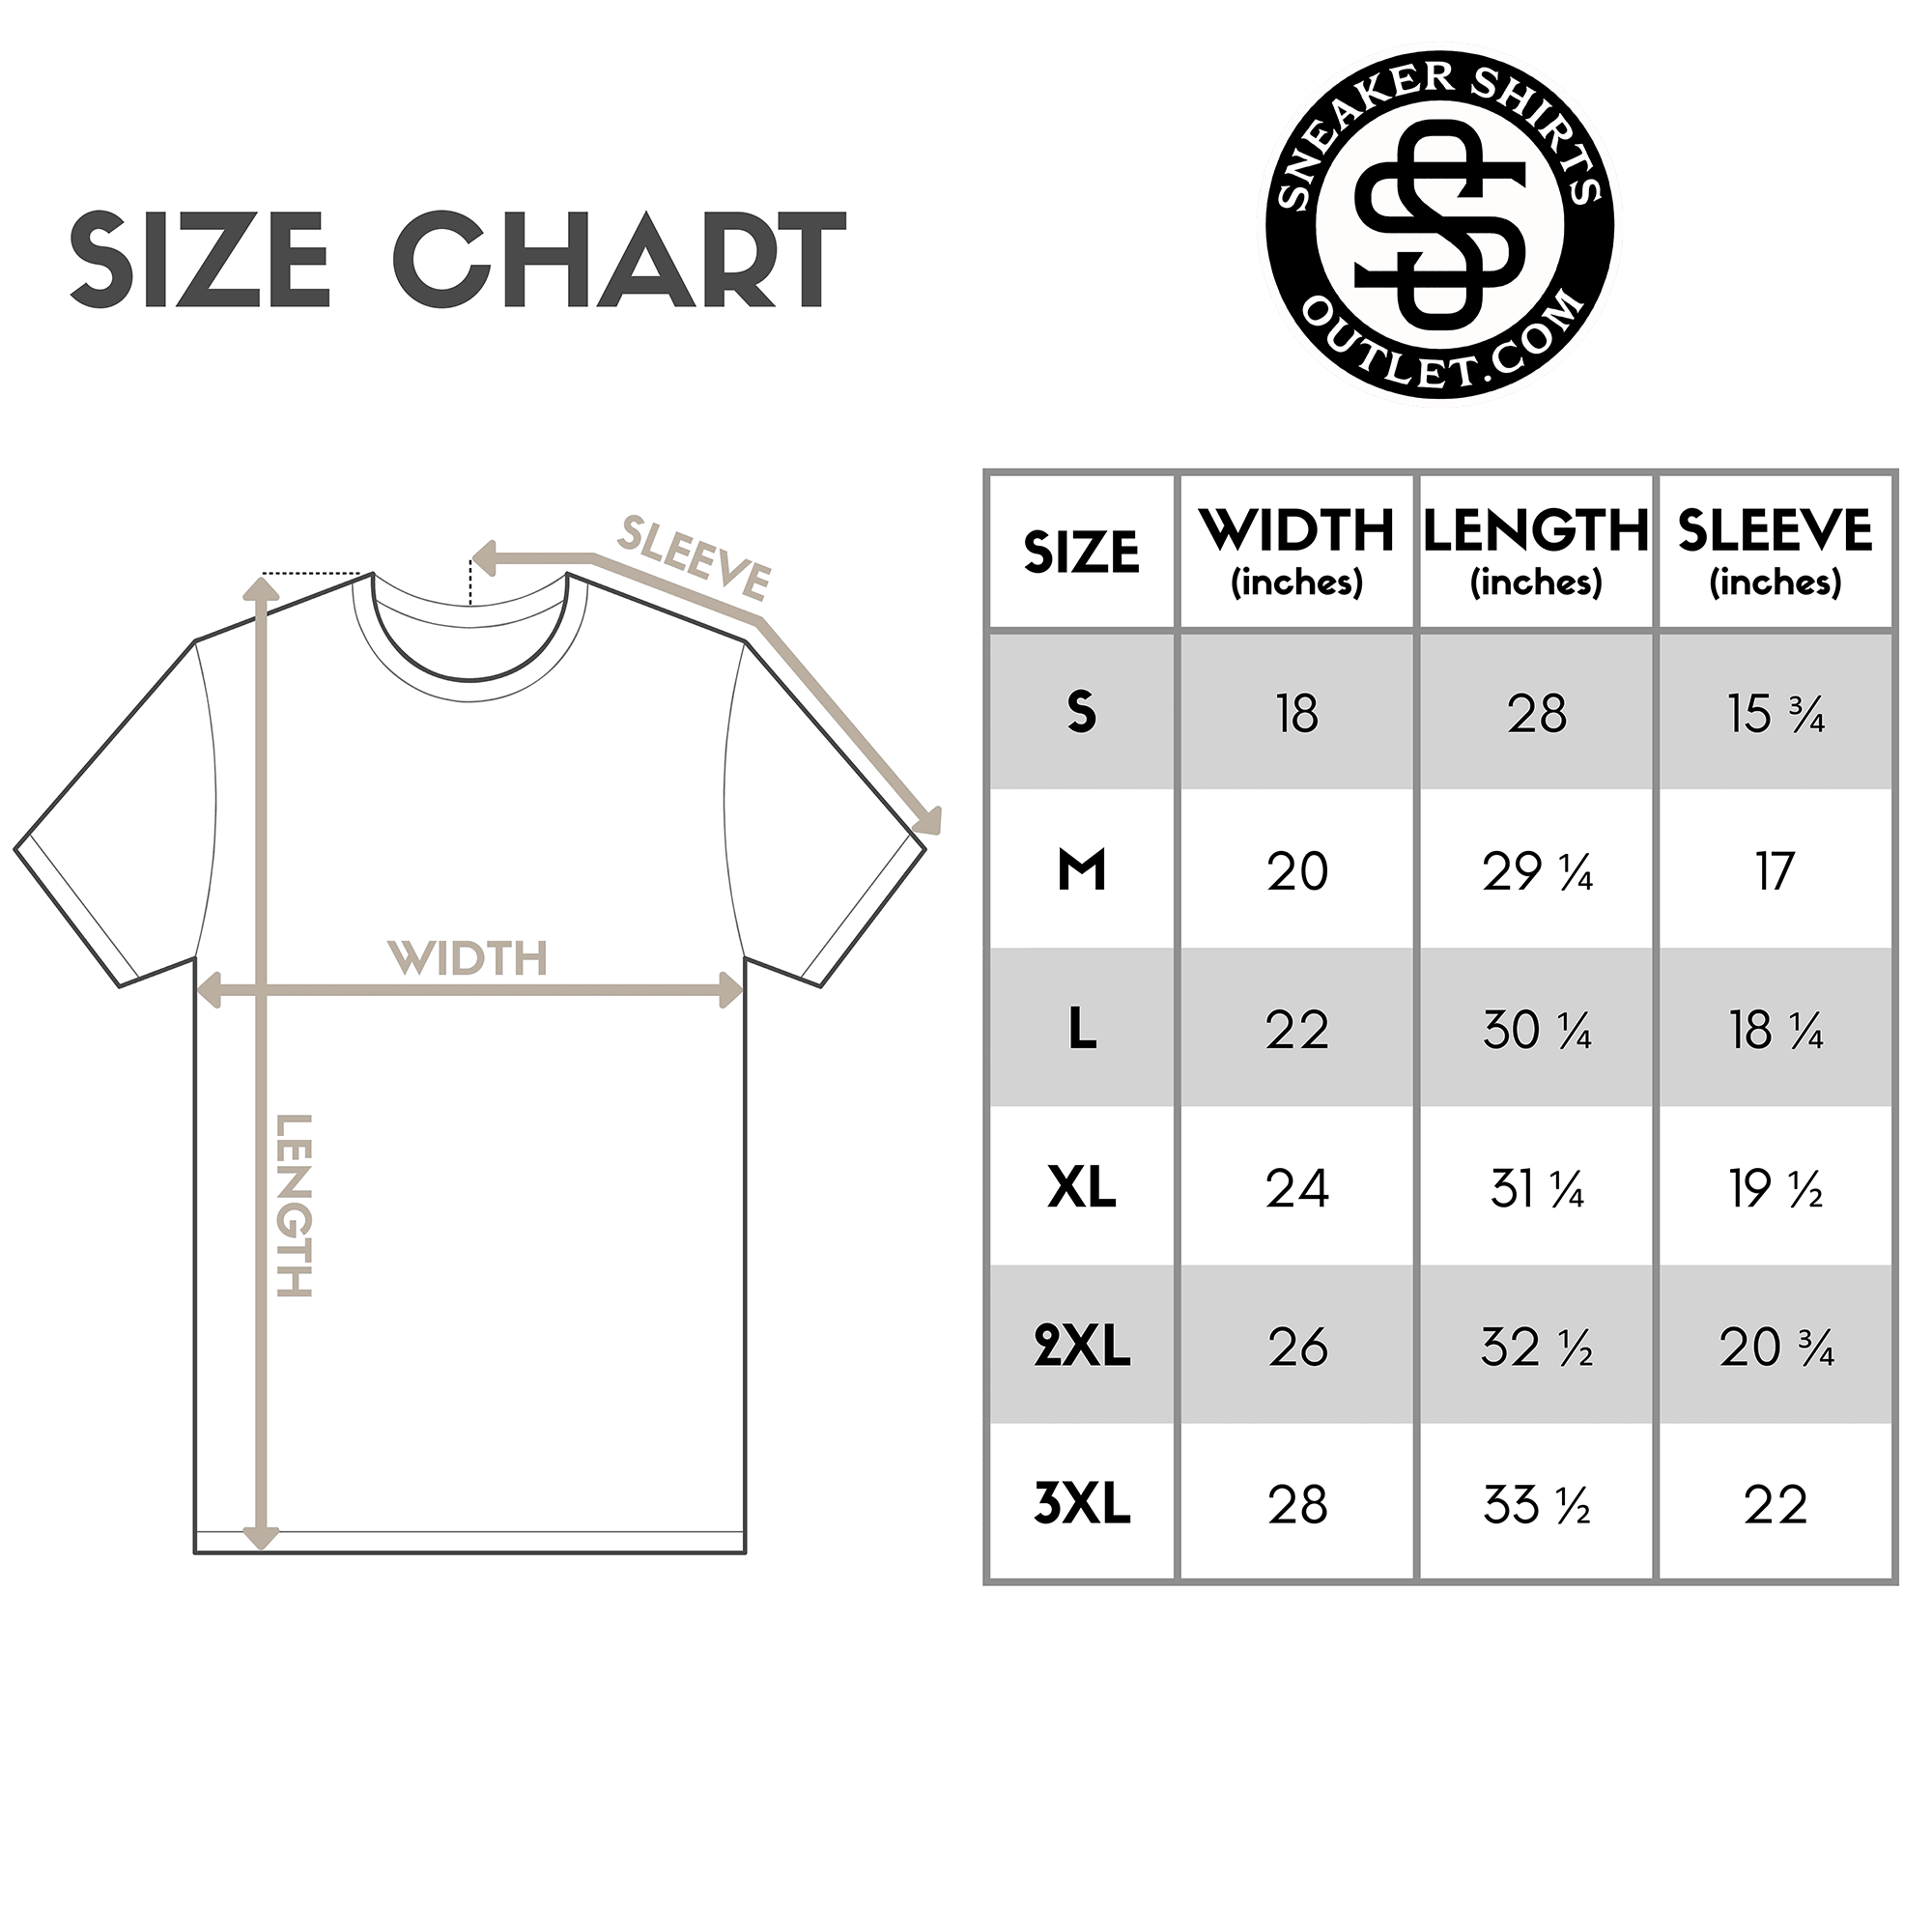 size chart for Lover Shirt Yeezy Boost 350 V2 Dazzling Blue photo